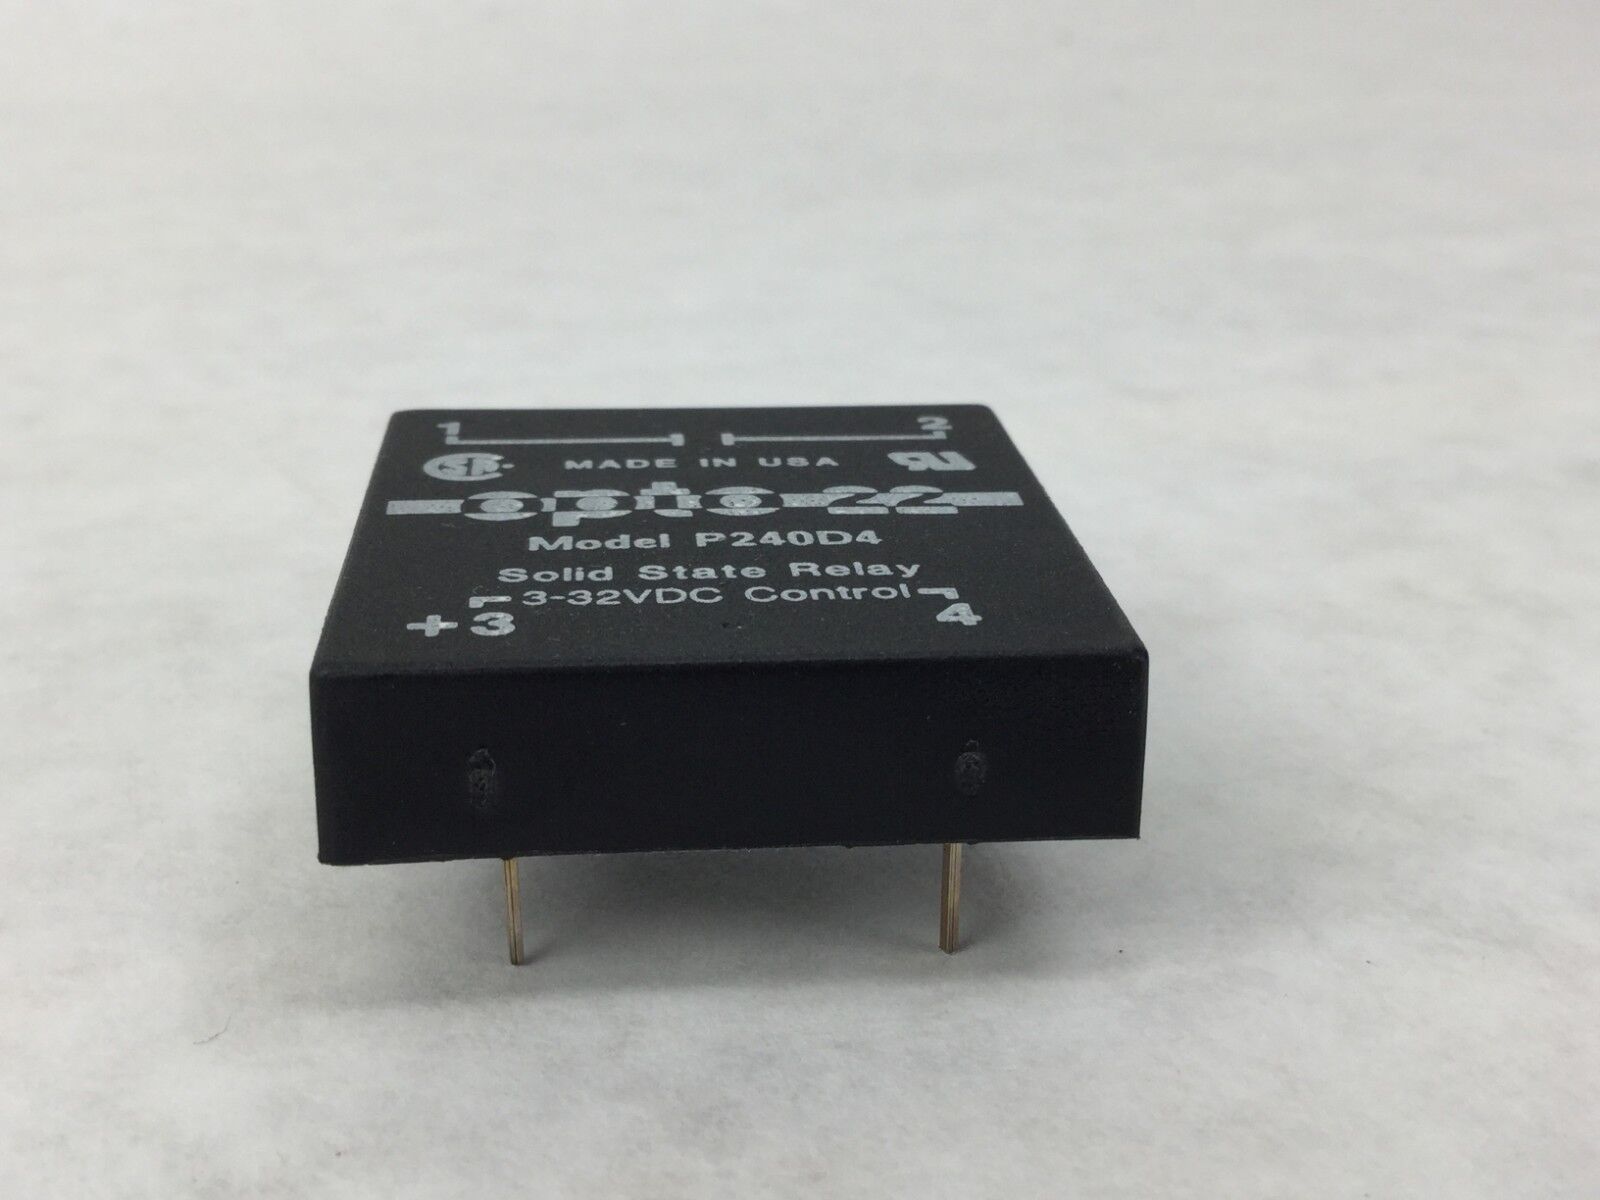 opto22 Solid State Relay  P240D4